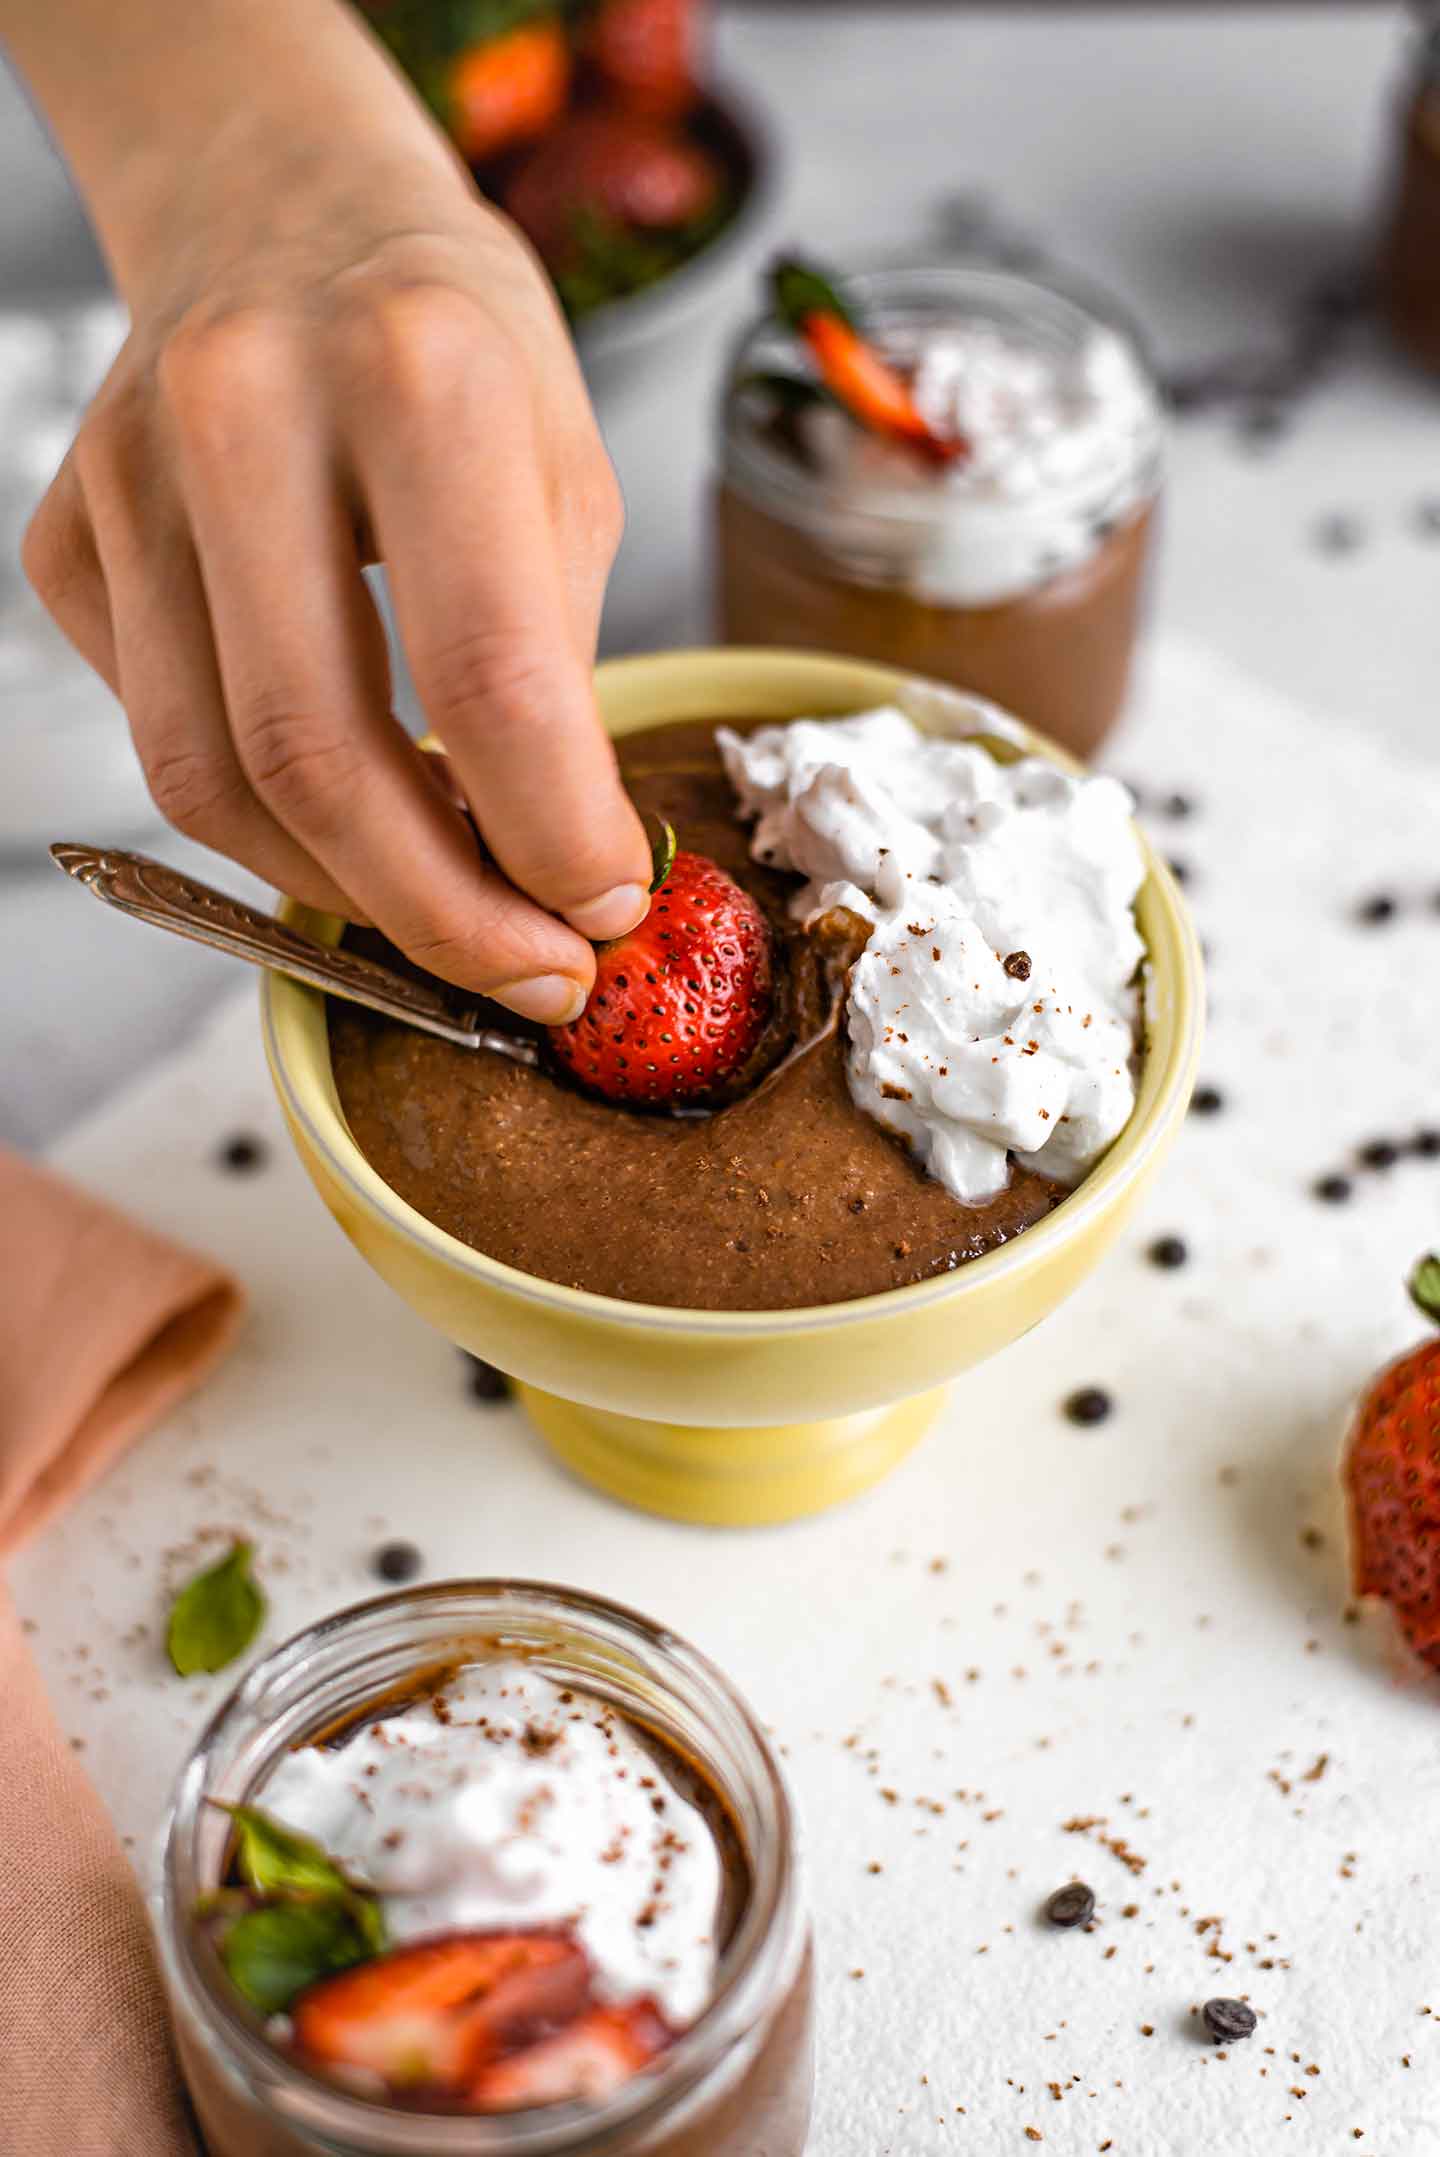 Side view of fingers dipping a strawberry into chocolate pudding and whipped cream.